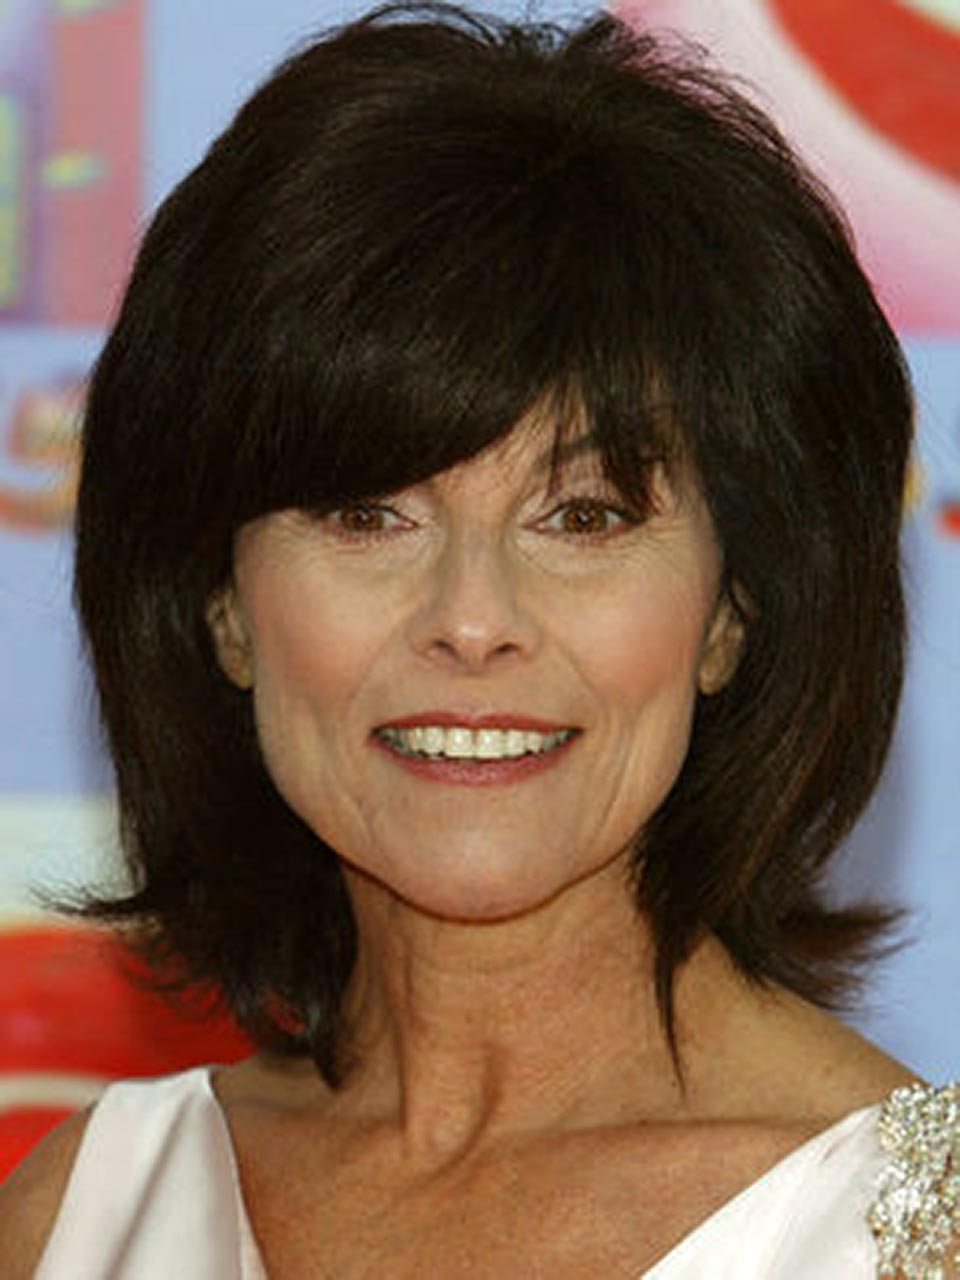 Big Naked Tits Google - Adrienne Barbeau Nude Pics â€” This Actress Had Huge Tits ...